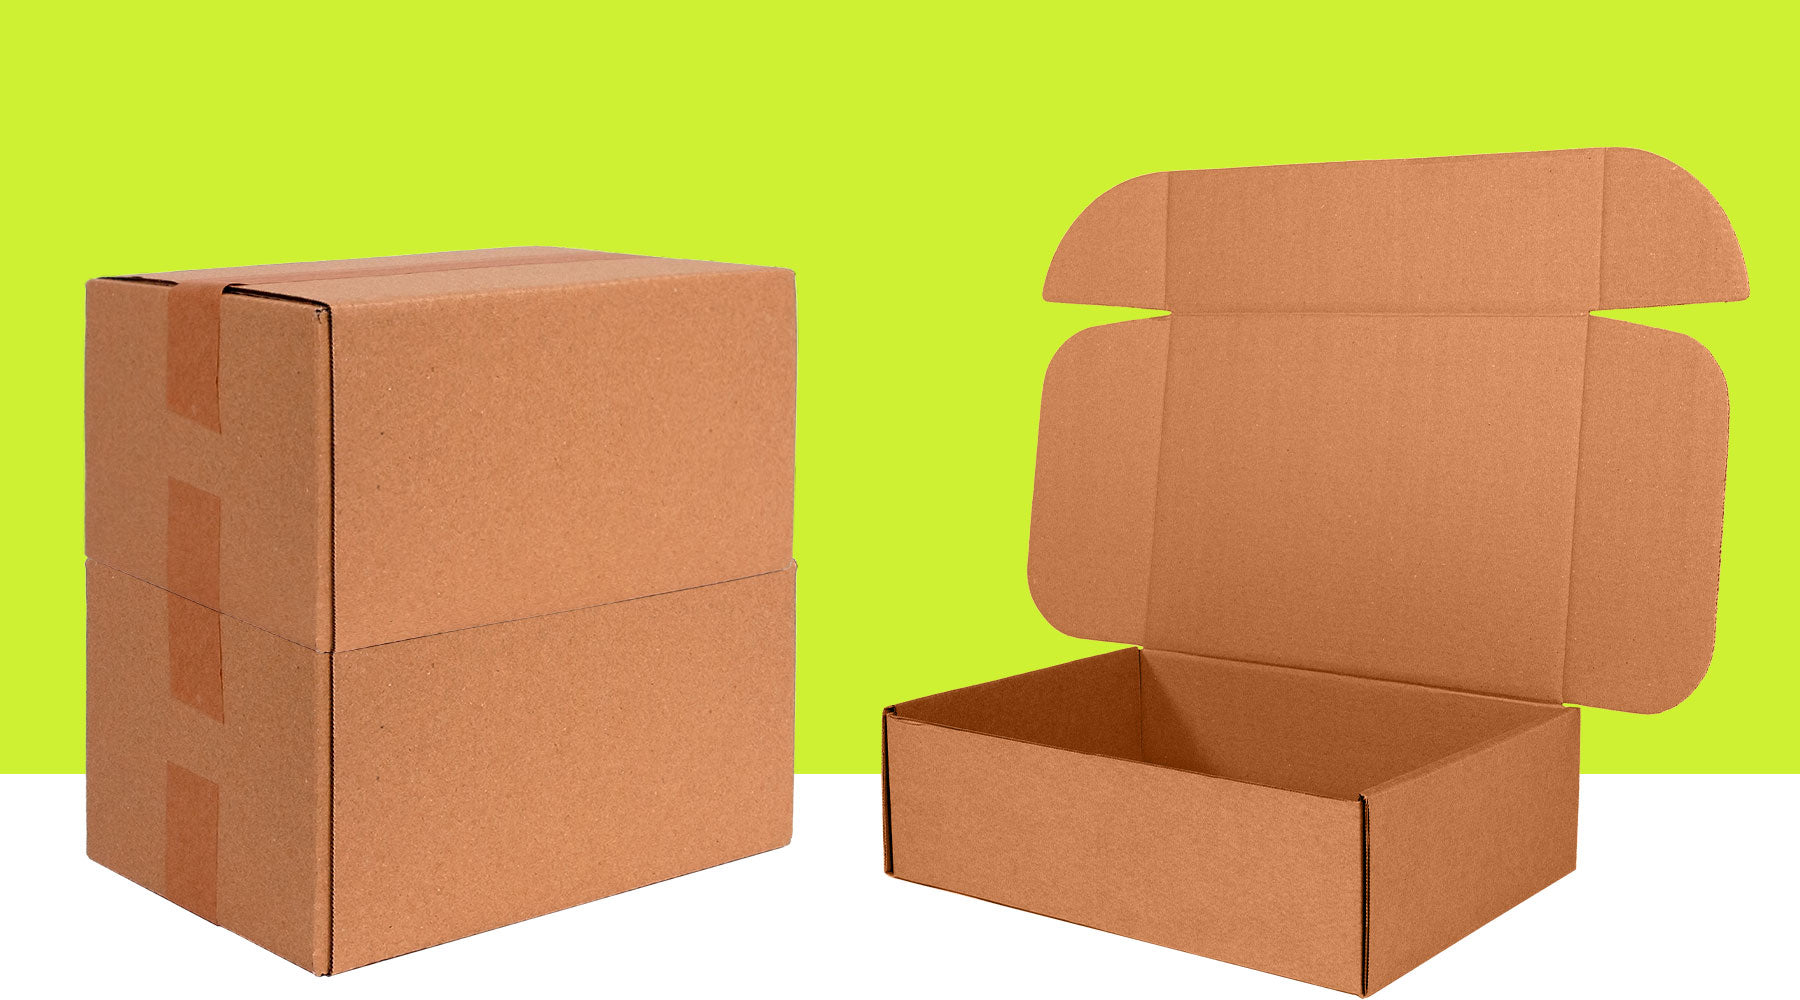 Cardboard boxes for mailing and shipping